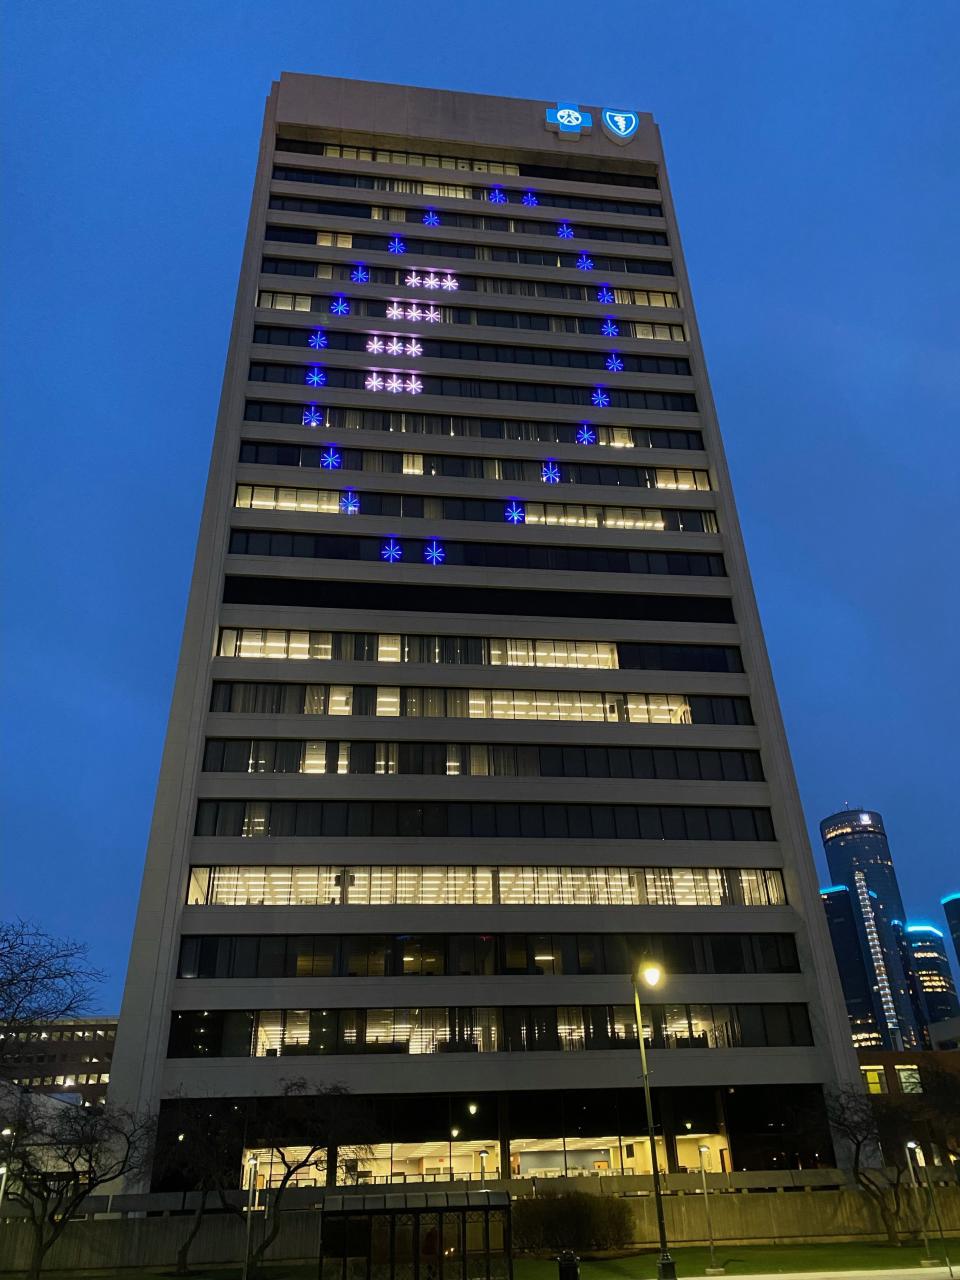 The Blue Cross Blue Shield of Michigan in Detroit is illuminated to celebrate the Lions' NFC North Division title.